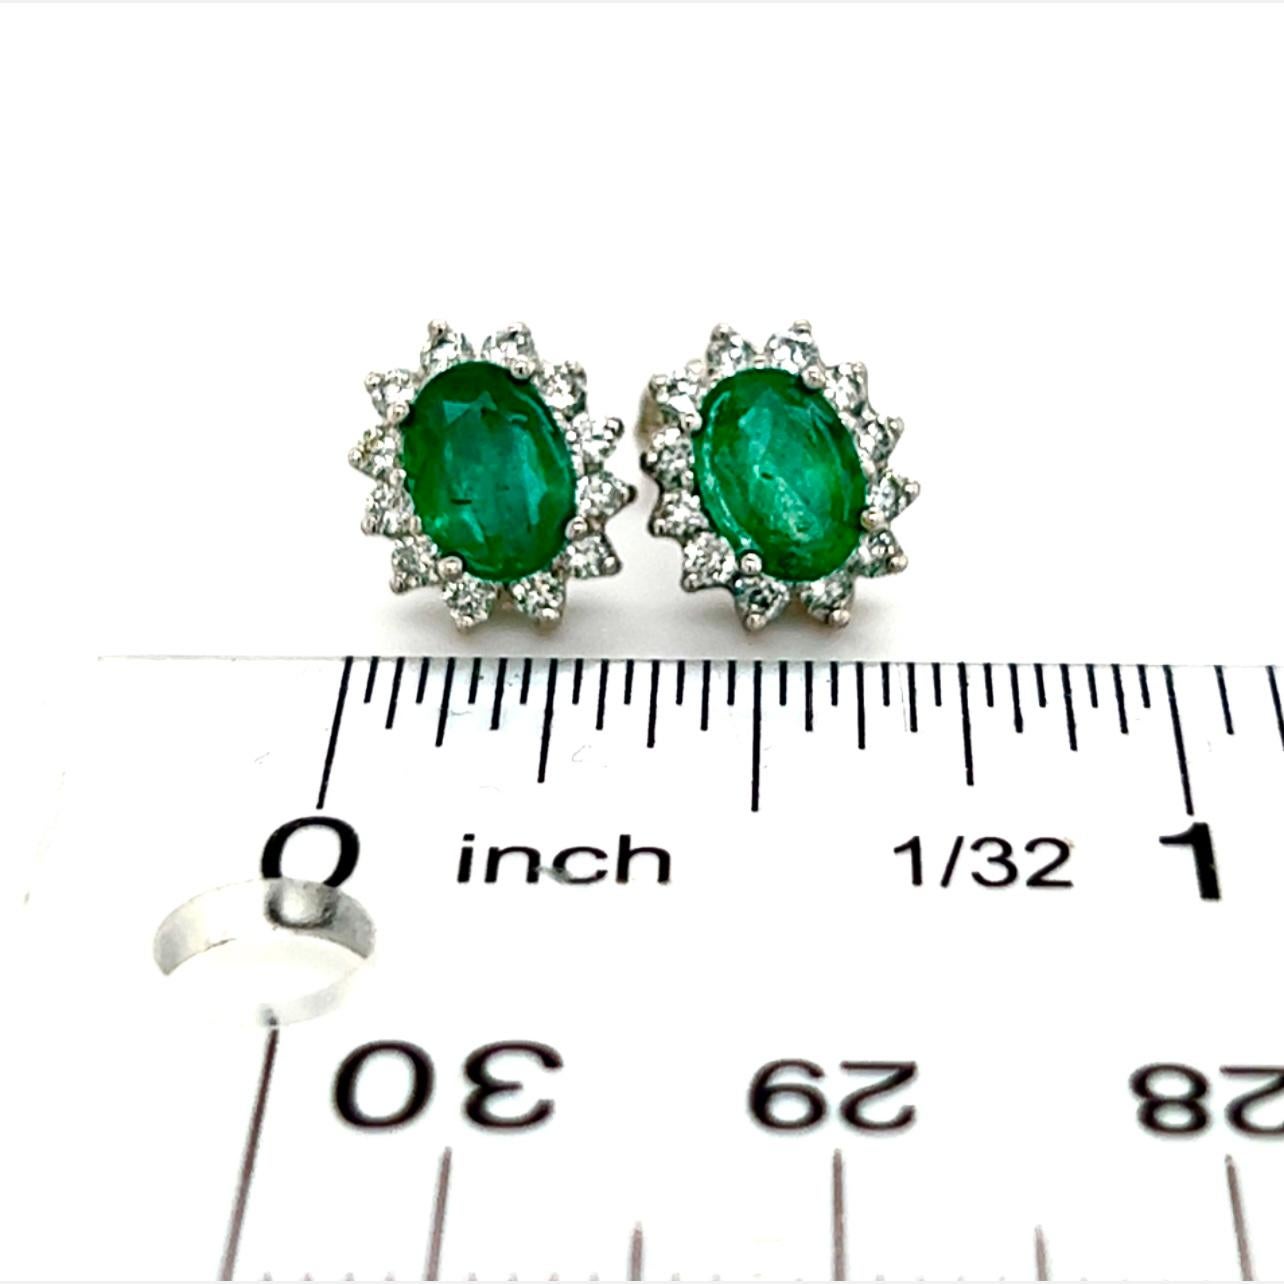 Oval Cut Natural Emerald Diamond Earrings 14k Gold 1.9 TCW Certified For Sale